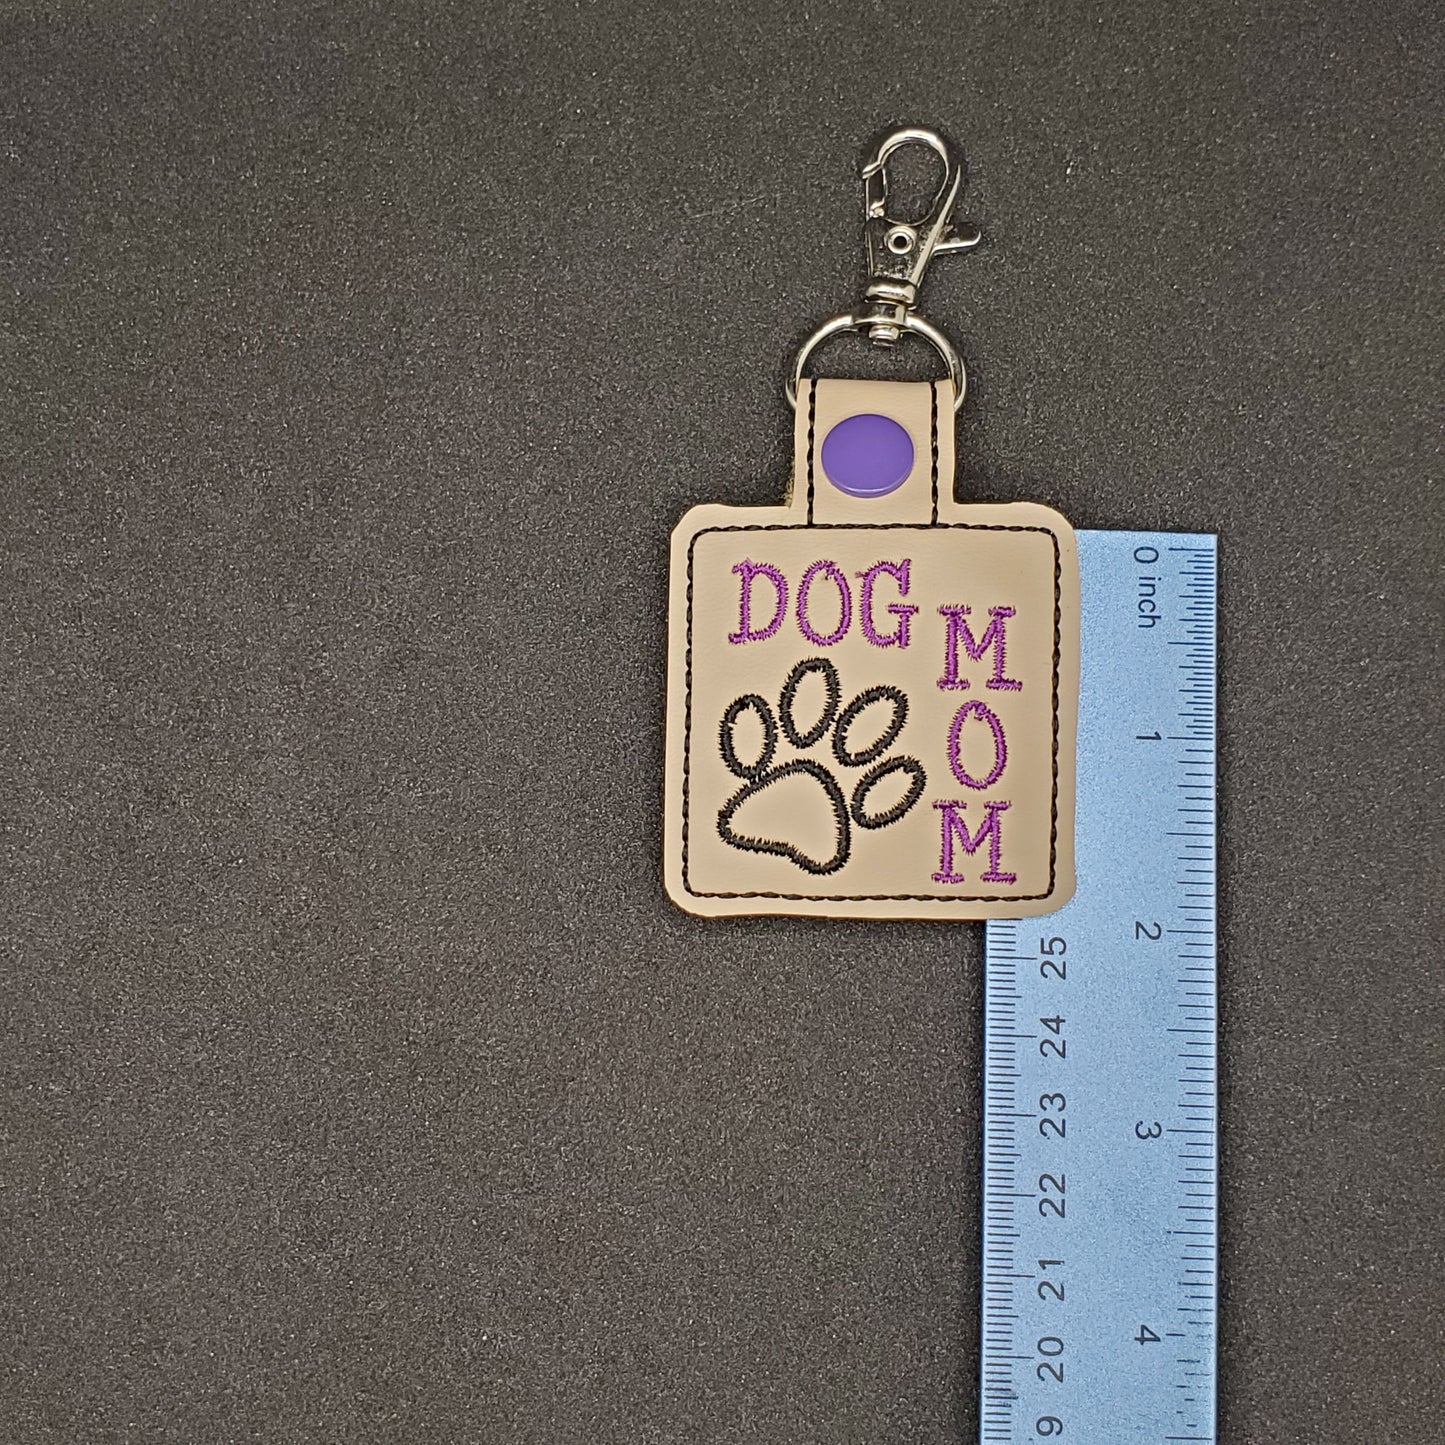 Dog Mom - Words stitched in Purple, Key Chain / Backpack Charm